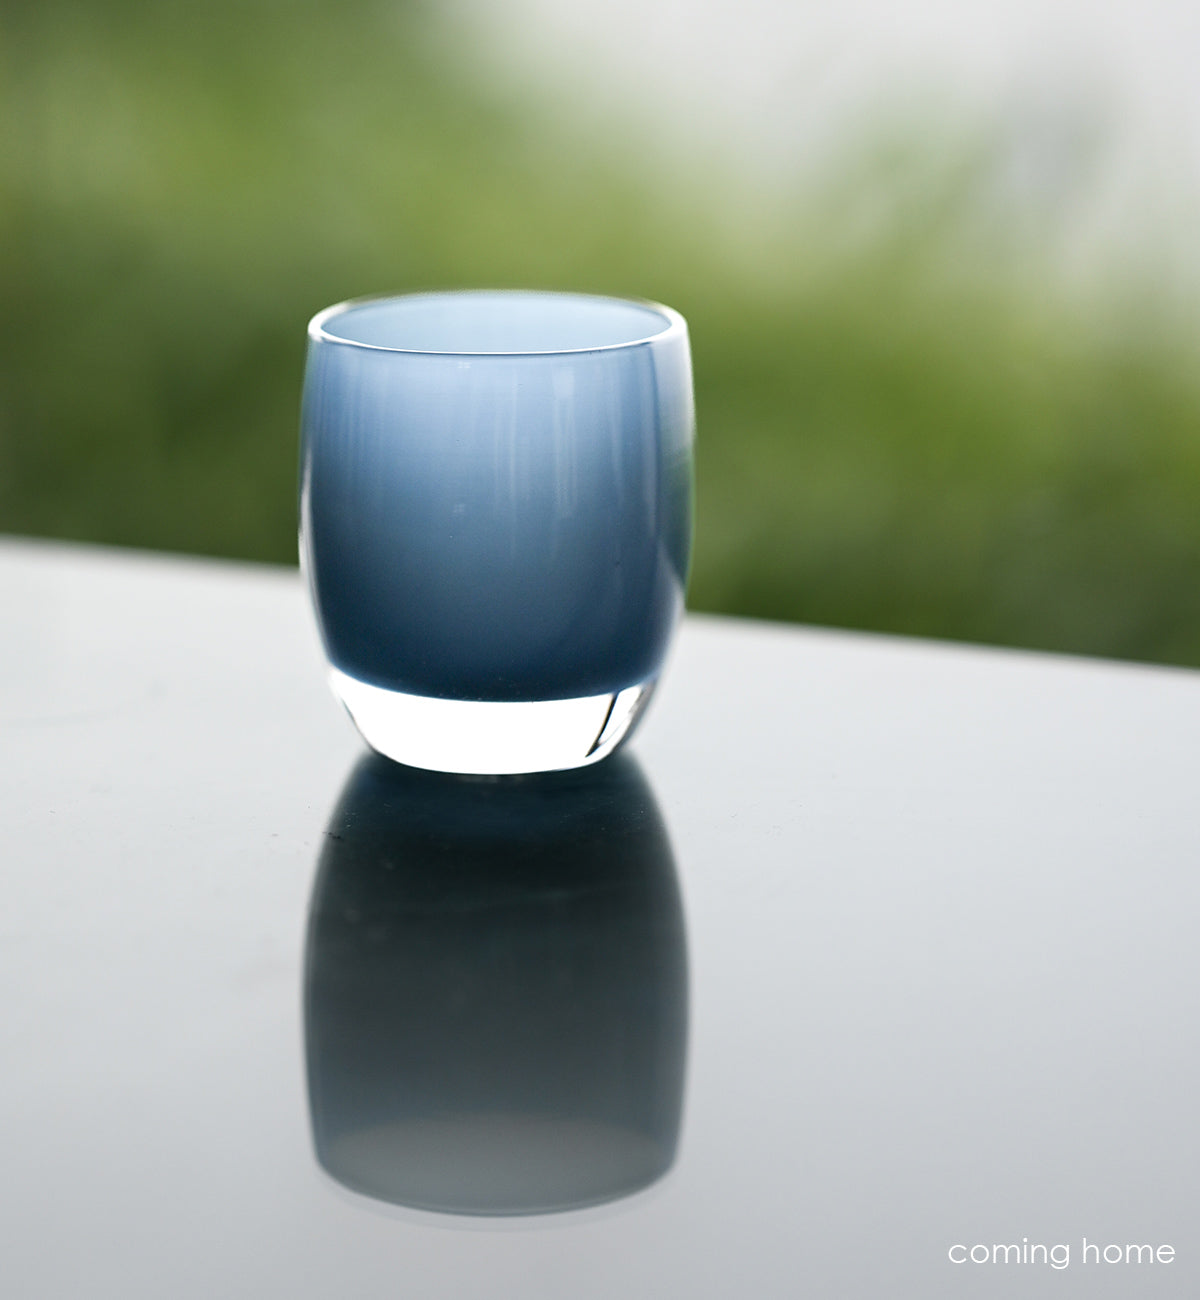 coming home a beautiful deep blue, hand-blown glass votive candle holder. the perfect way to celebrate coming home to your loved ones.